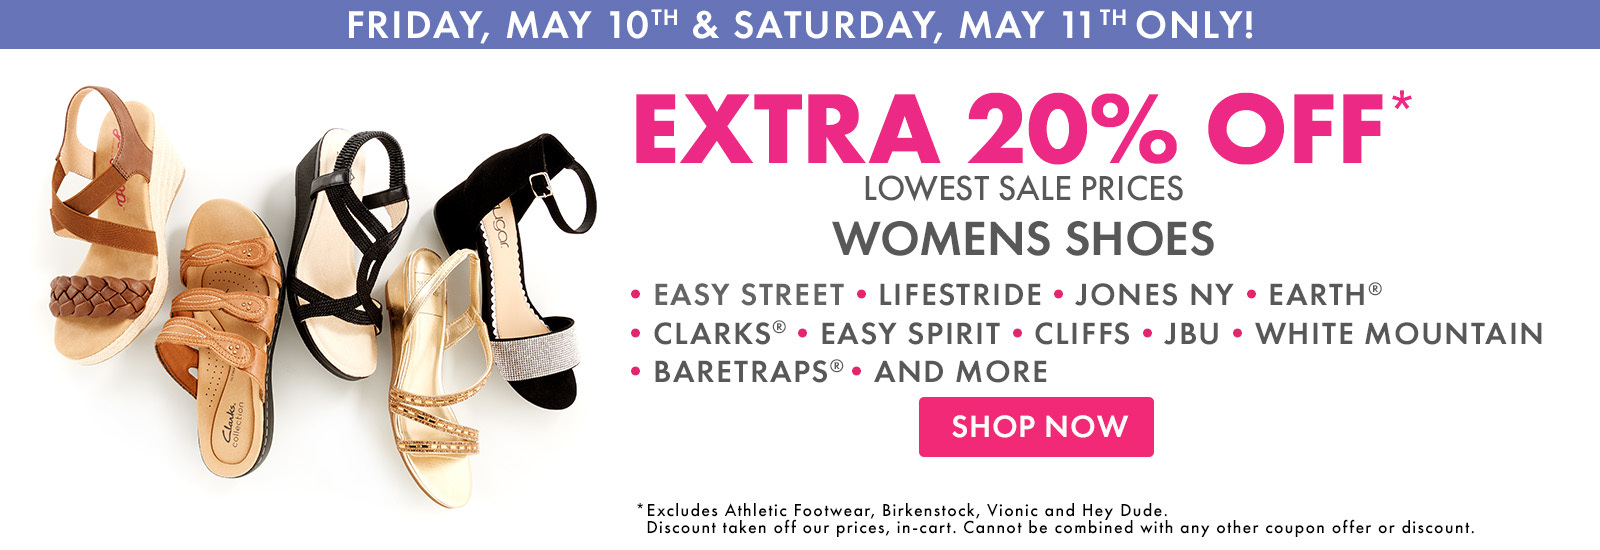 Extra 20% Off Womens Shoes